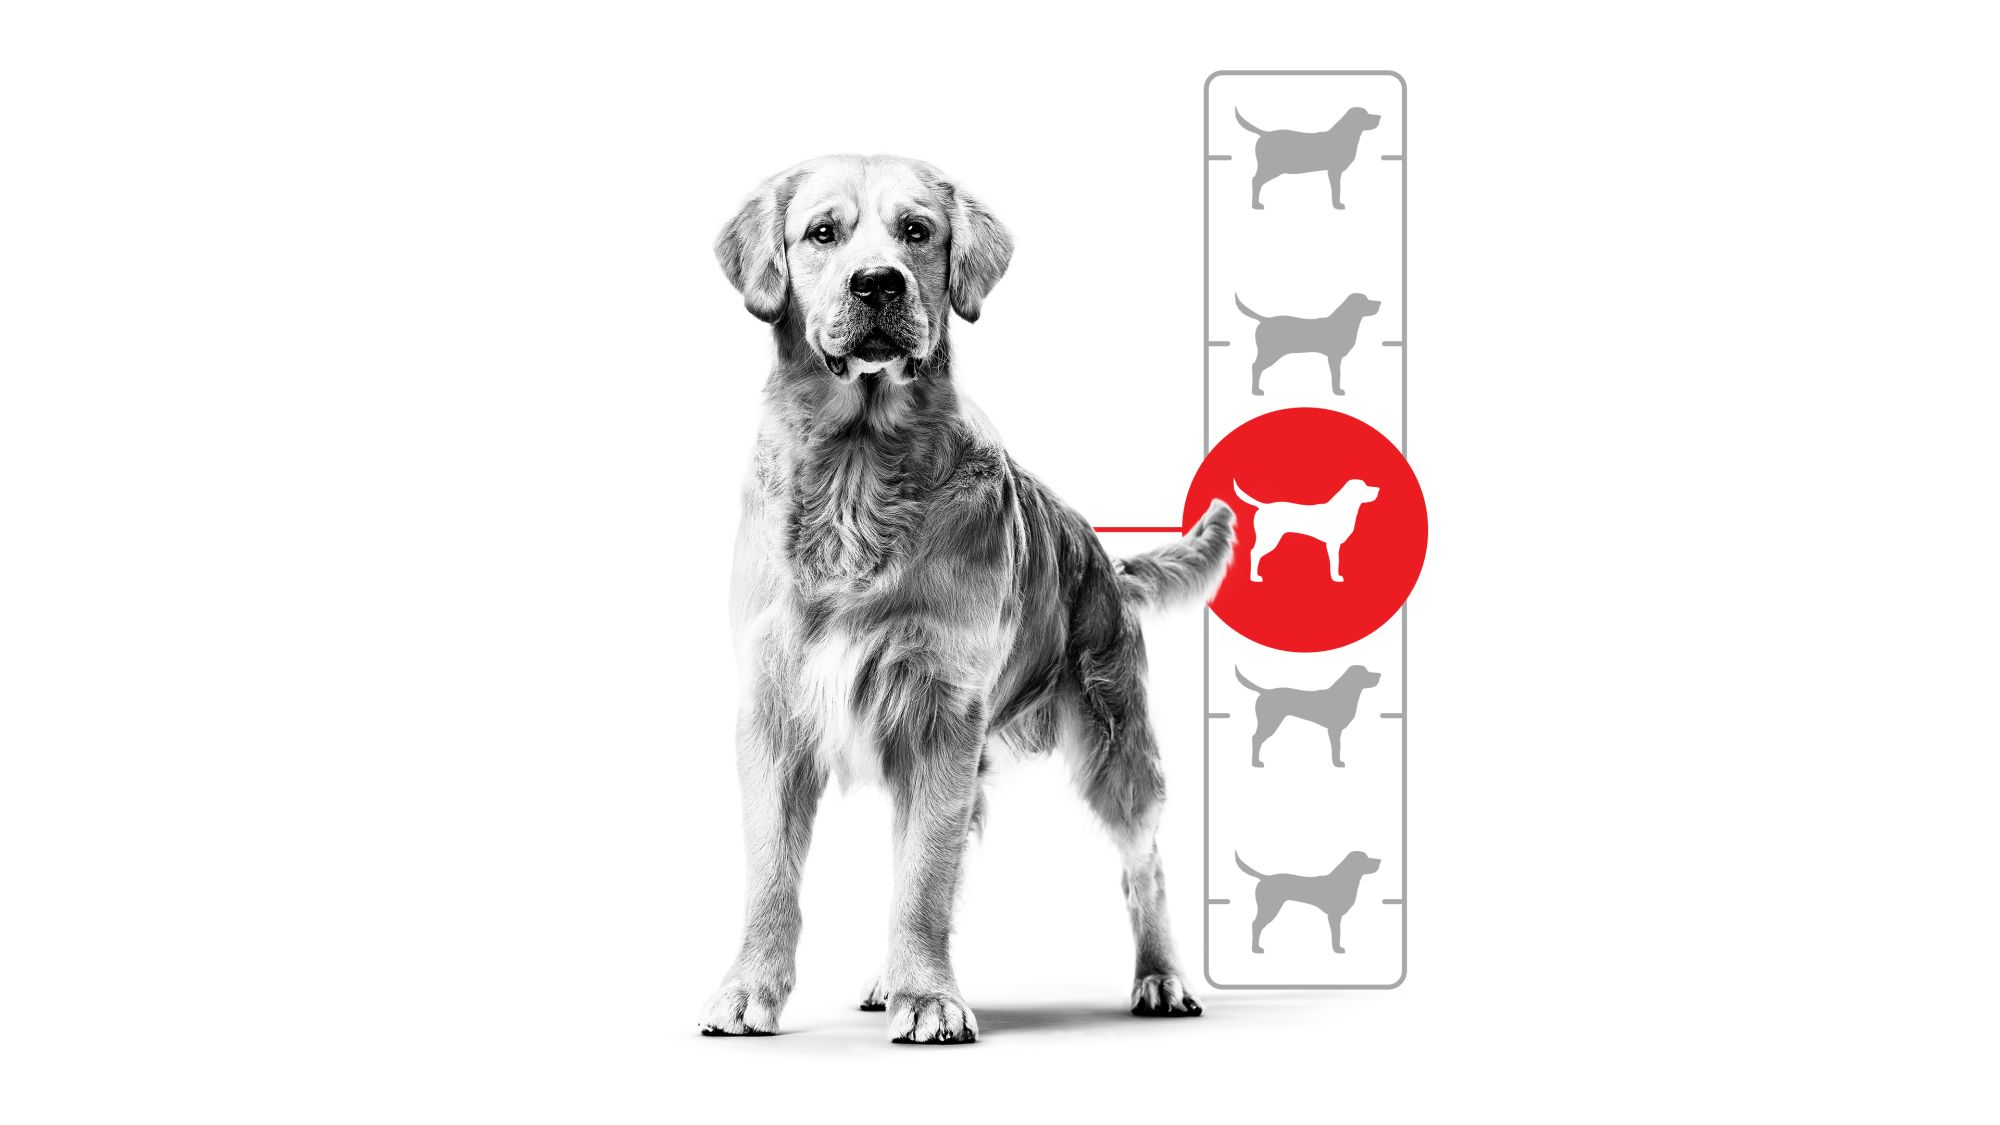 Golden Retriever adult in black and white with Body Conditioning Score illustration